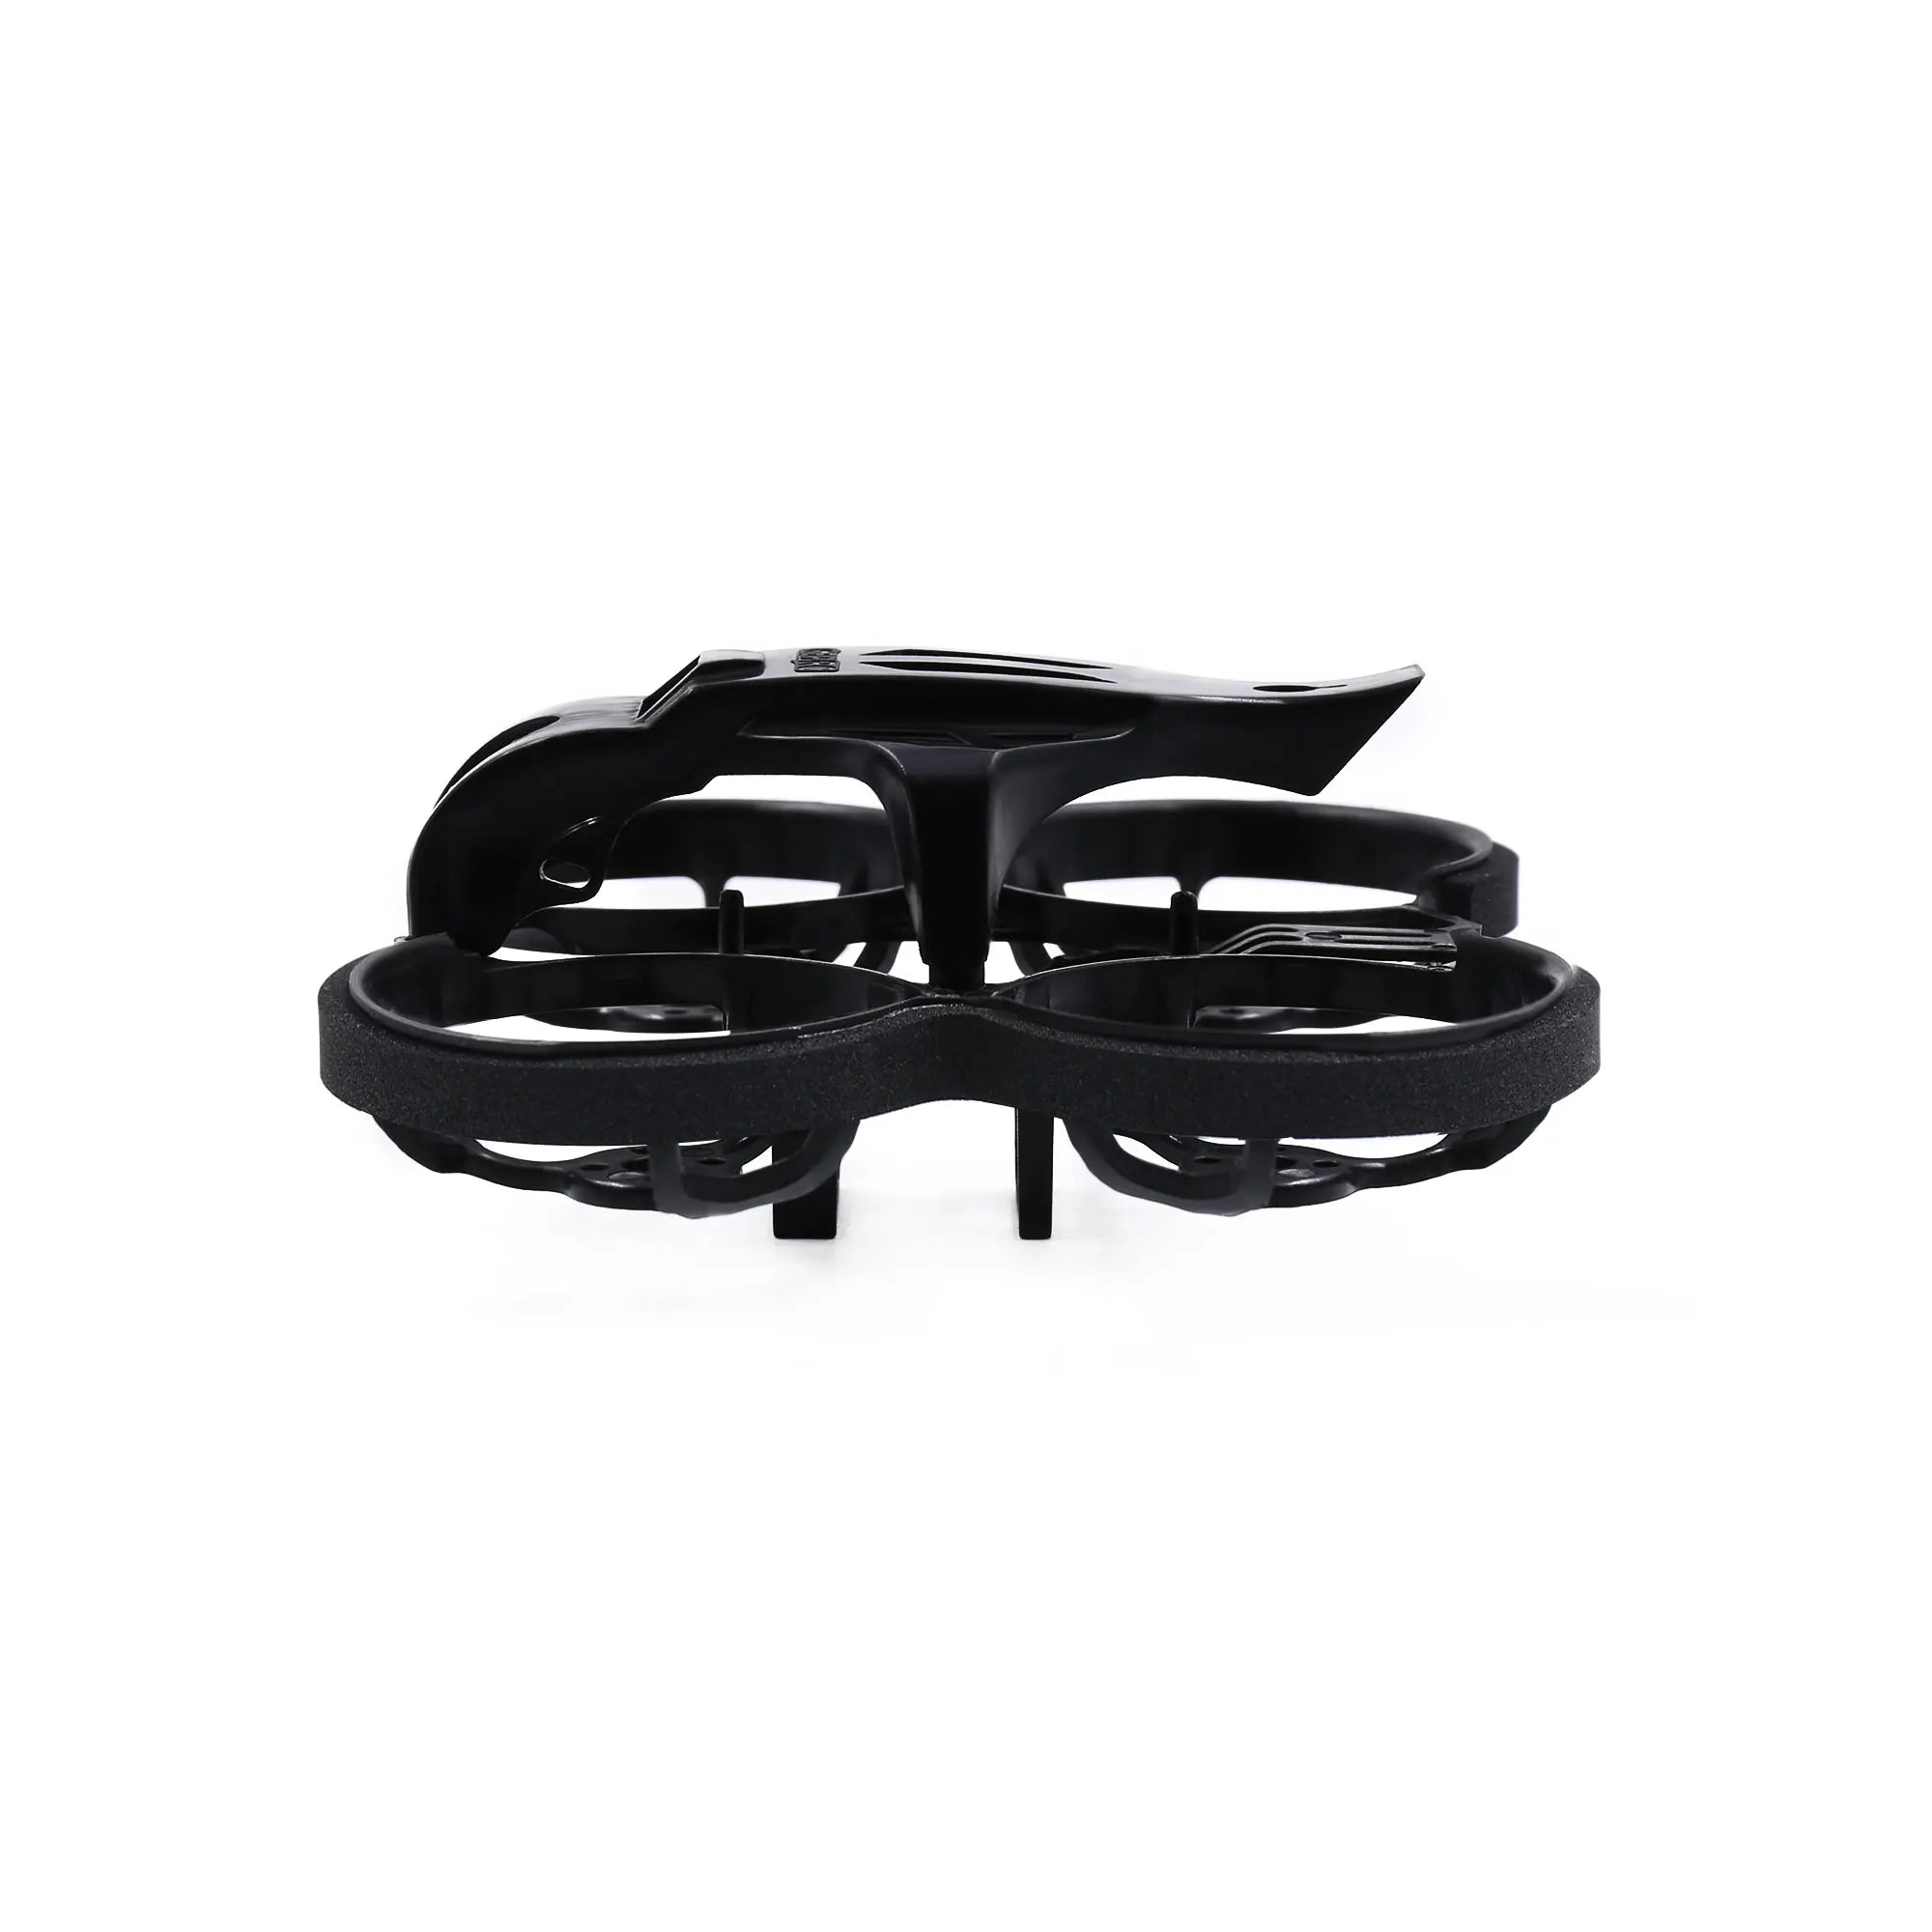 GEP-TG Frame include: 1 x Canopy Black 1x Bottom plate